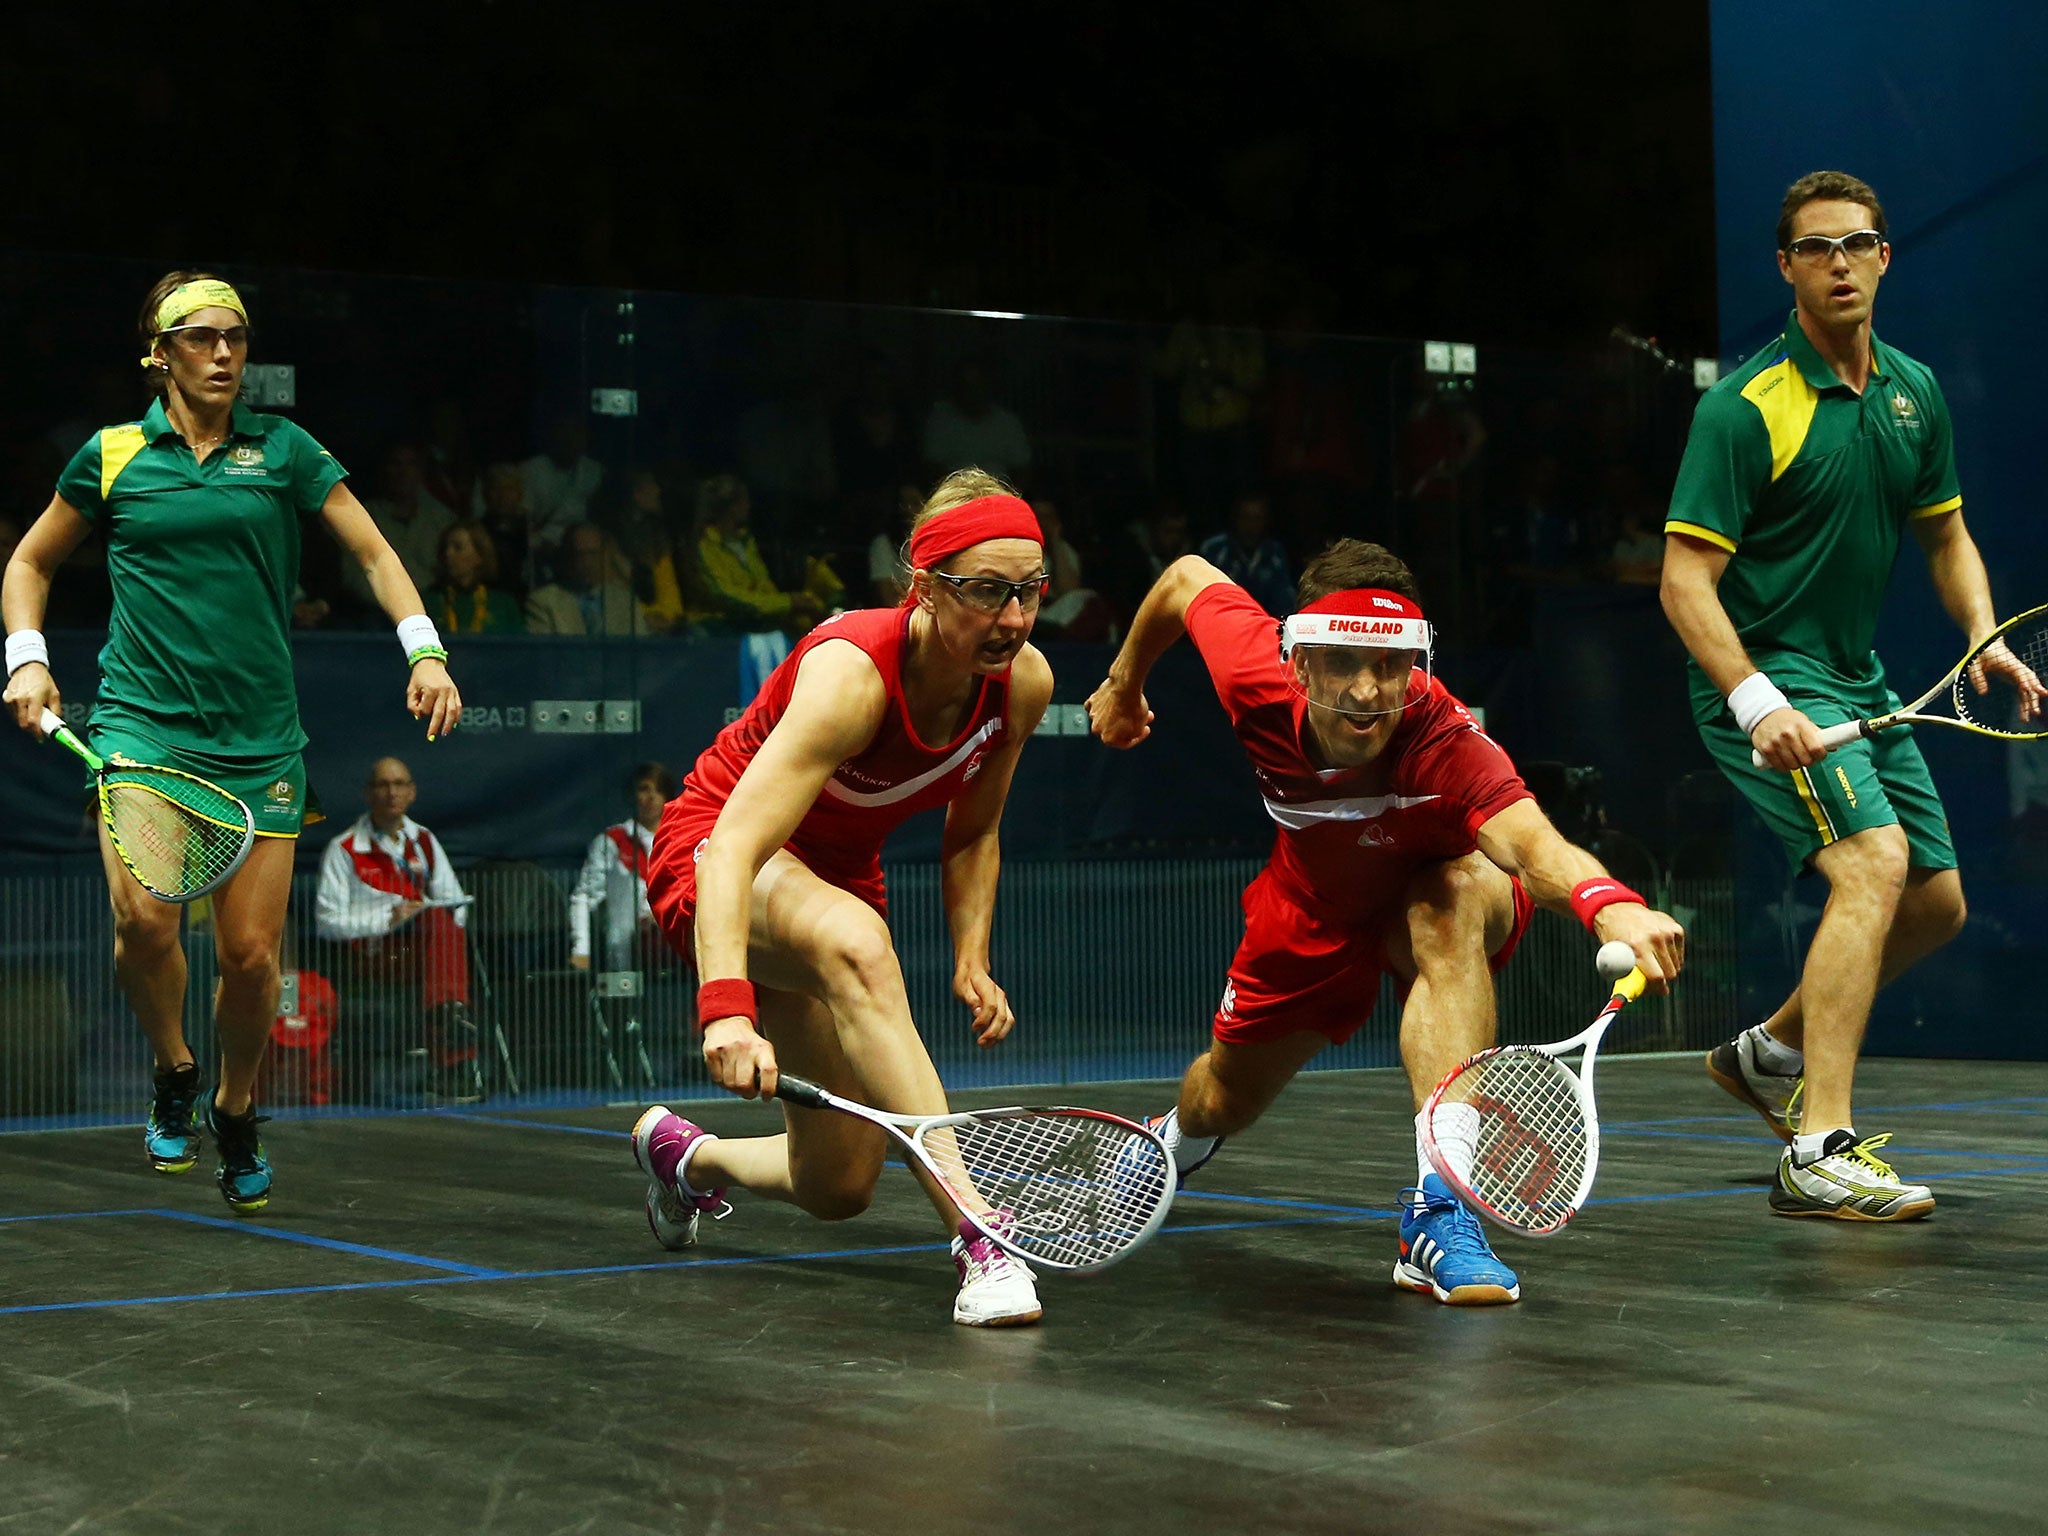 England’s Peter Barker and Alison Waters (red kit) were beaten by David Palmer and Rachael Grinham, of Australia